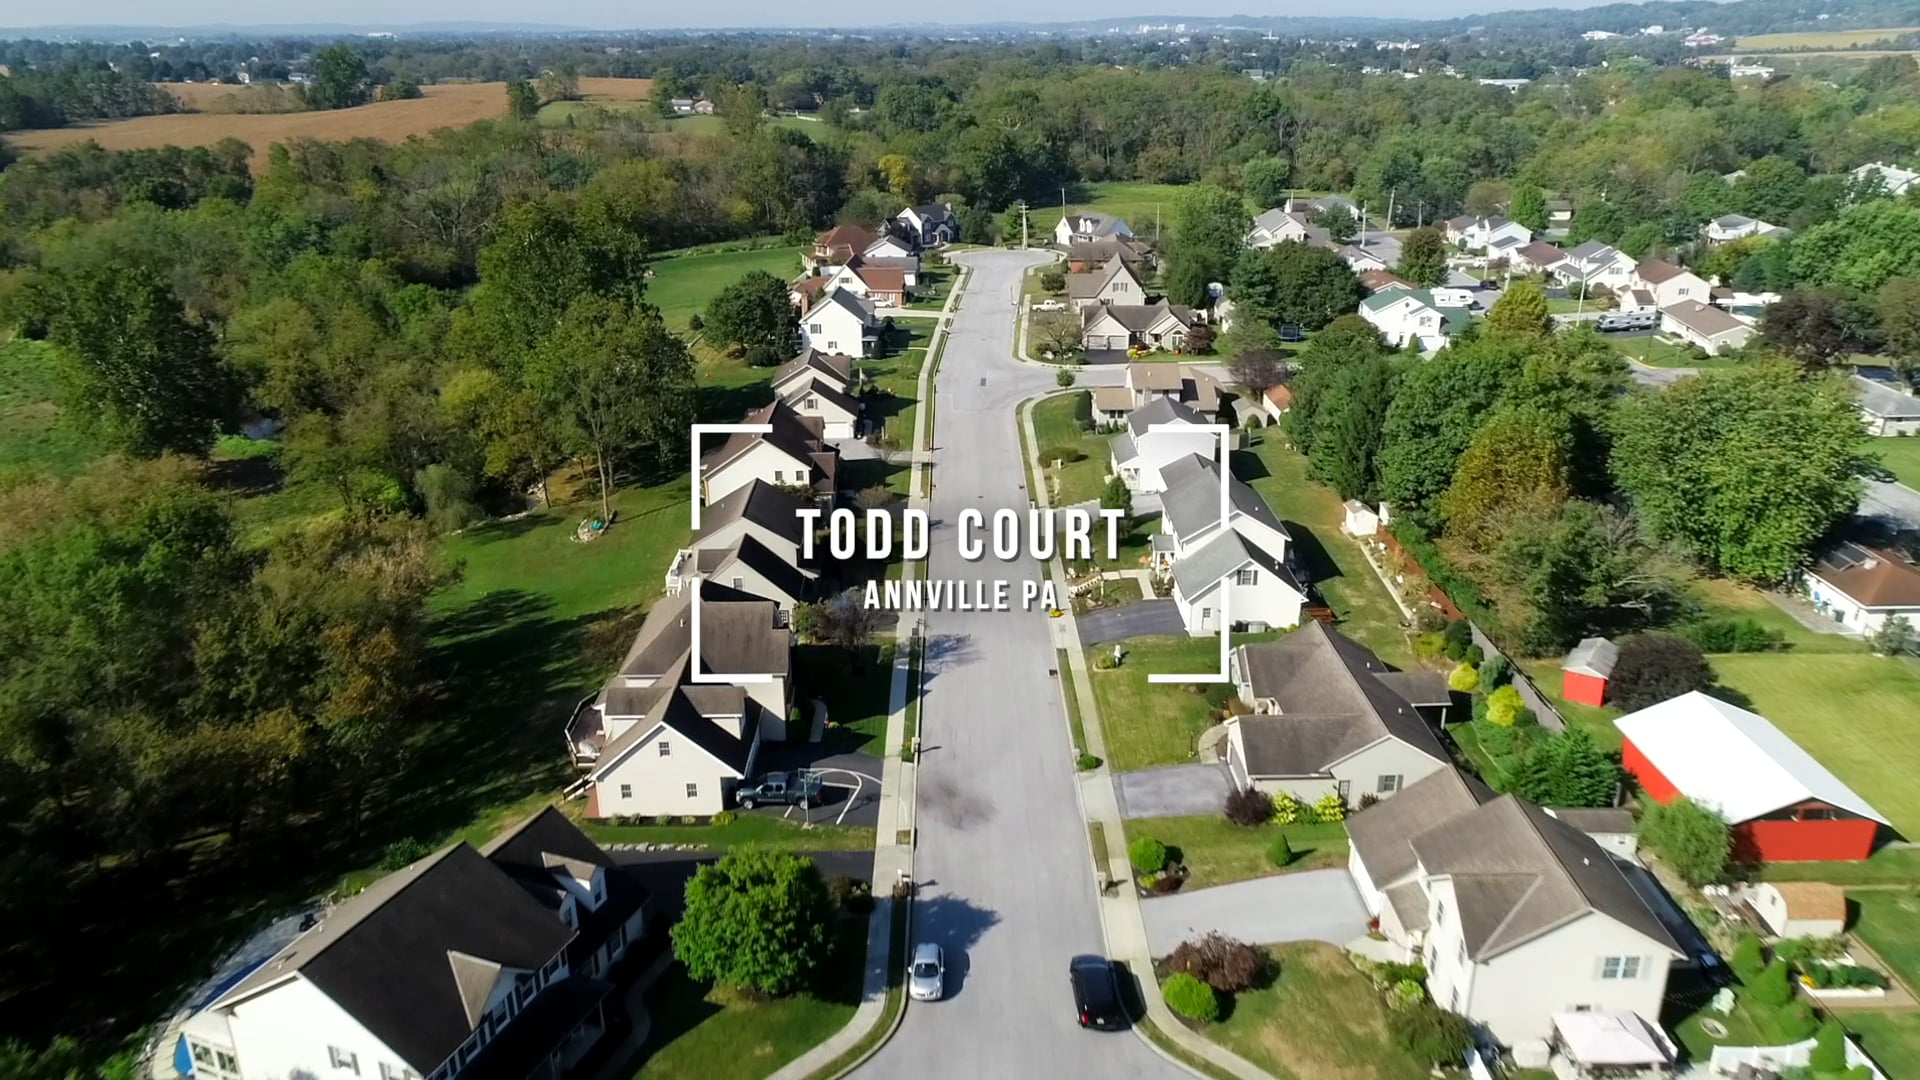 The Community of Todd Court, Annville PA